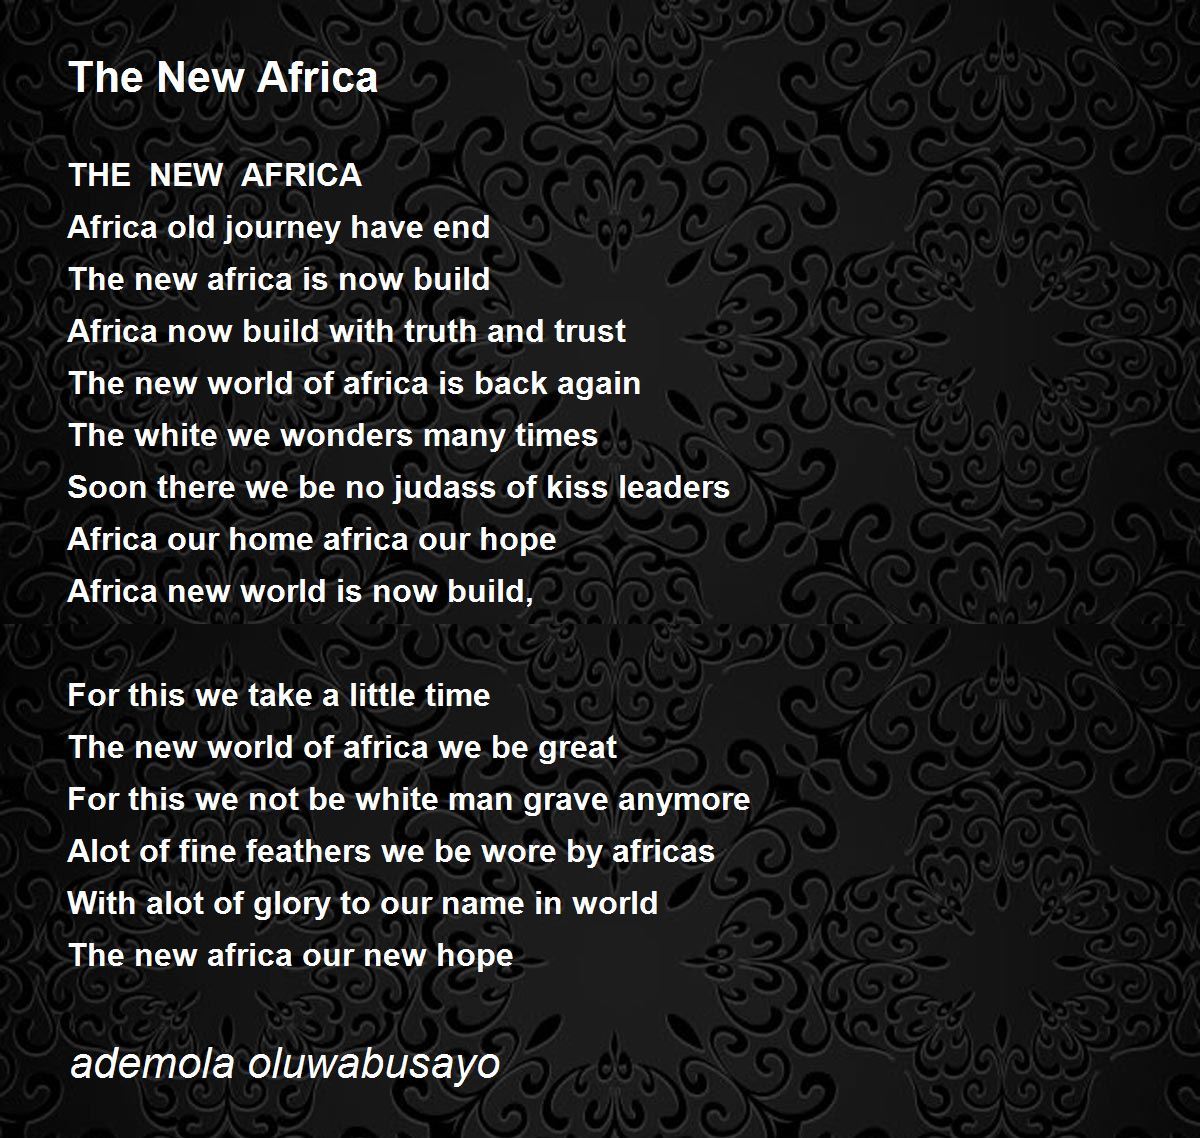 Old Poem For The New World (I Want To Go Home) - Old Poem For The